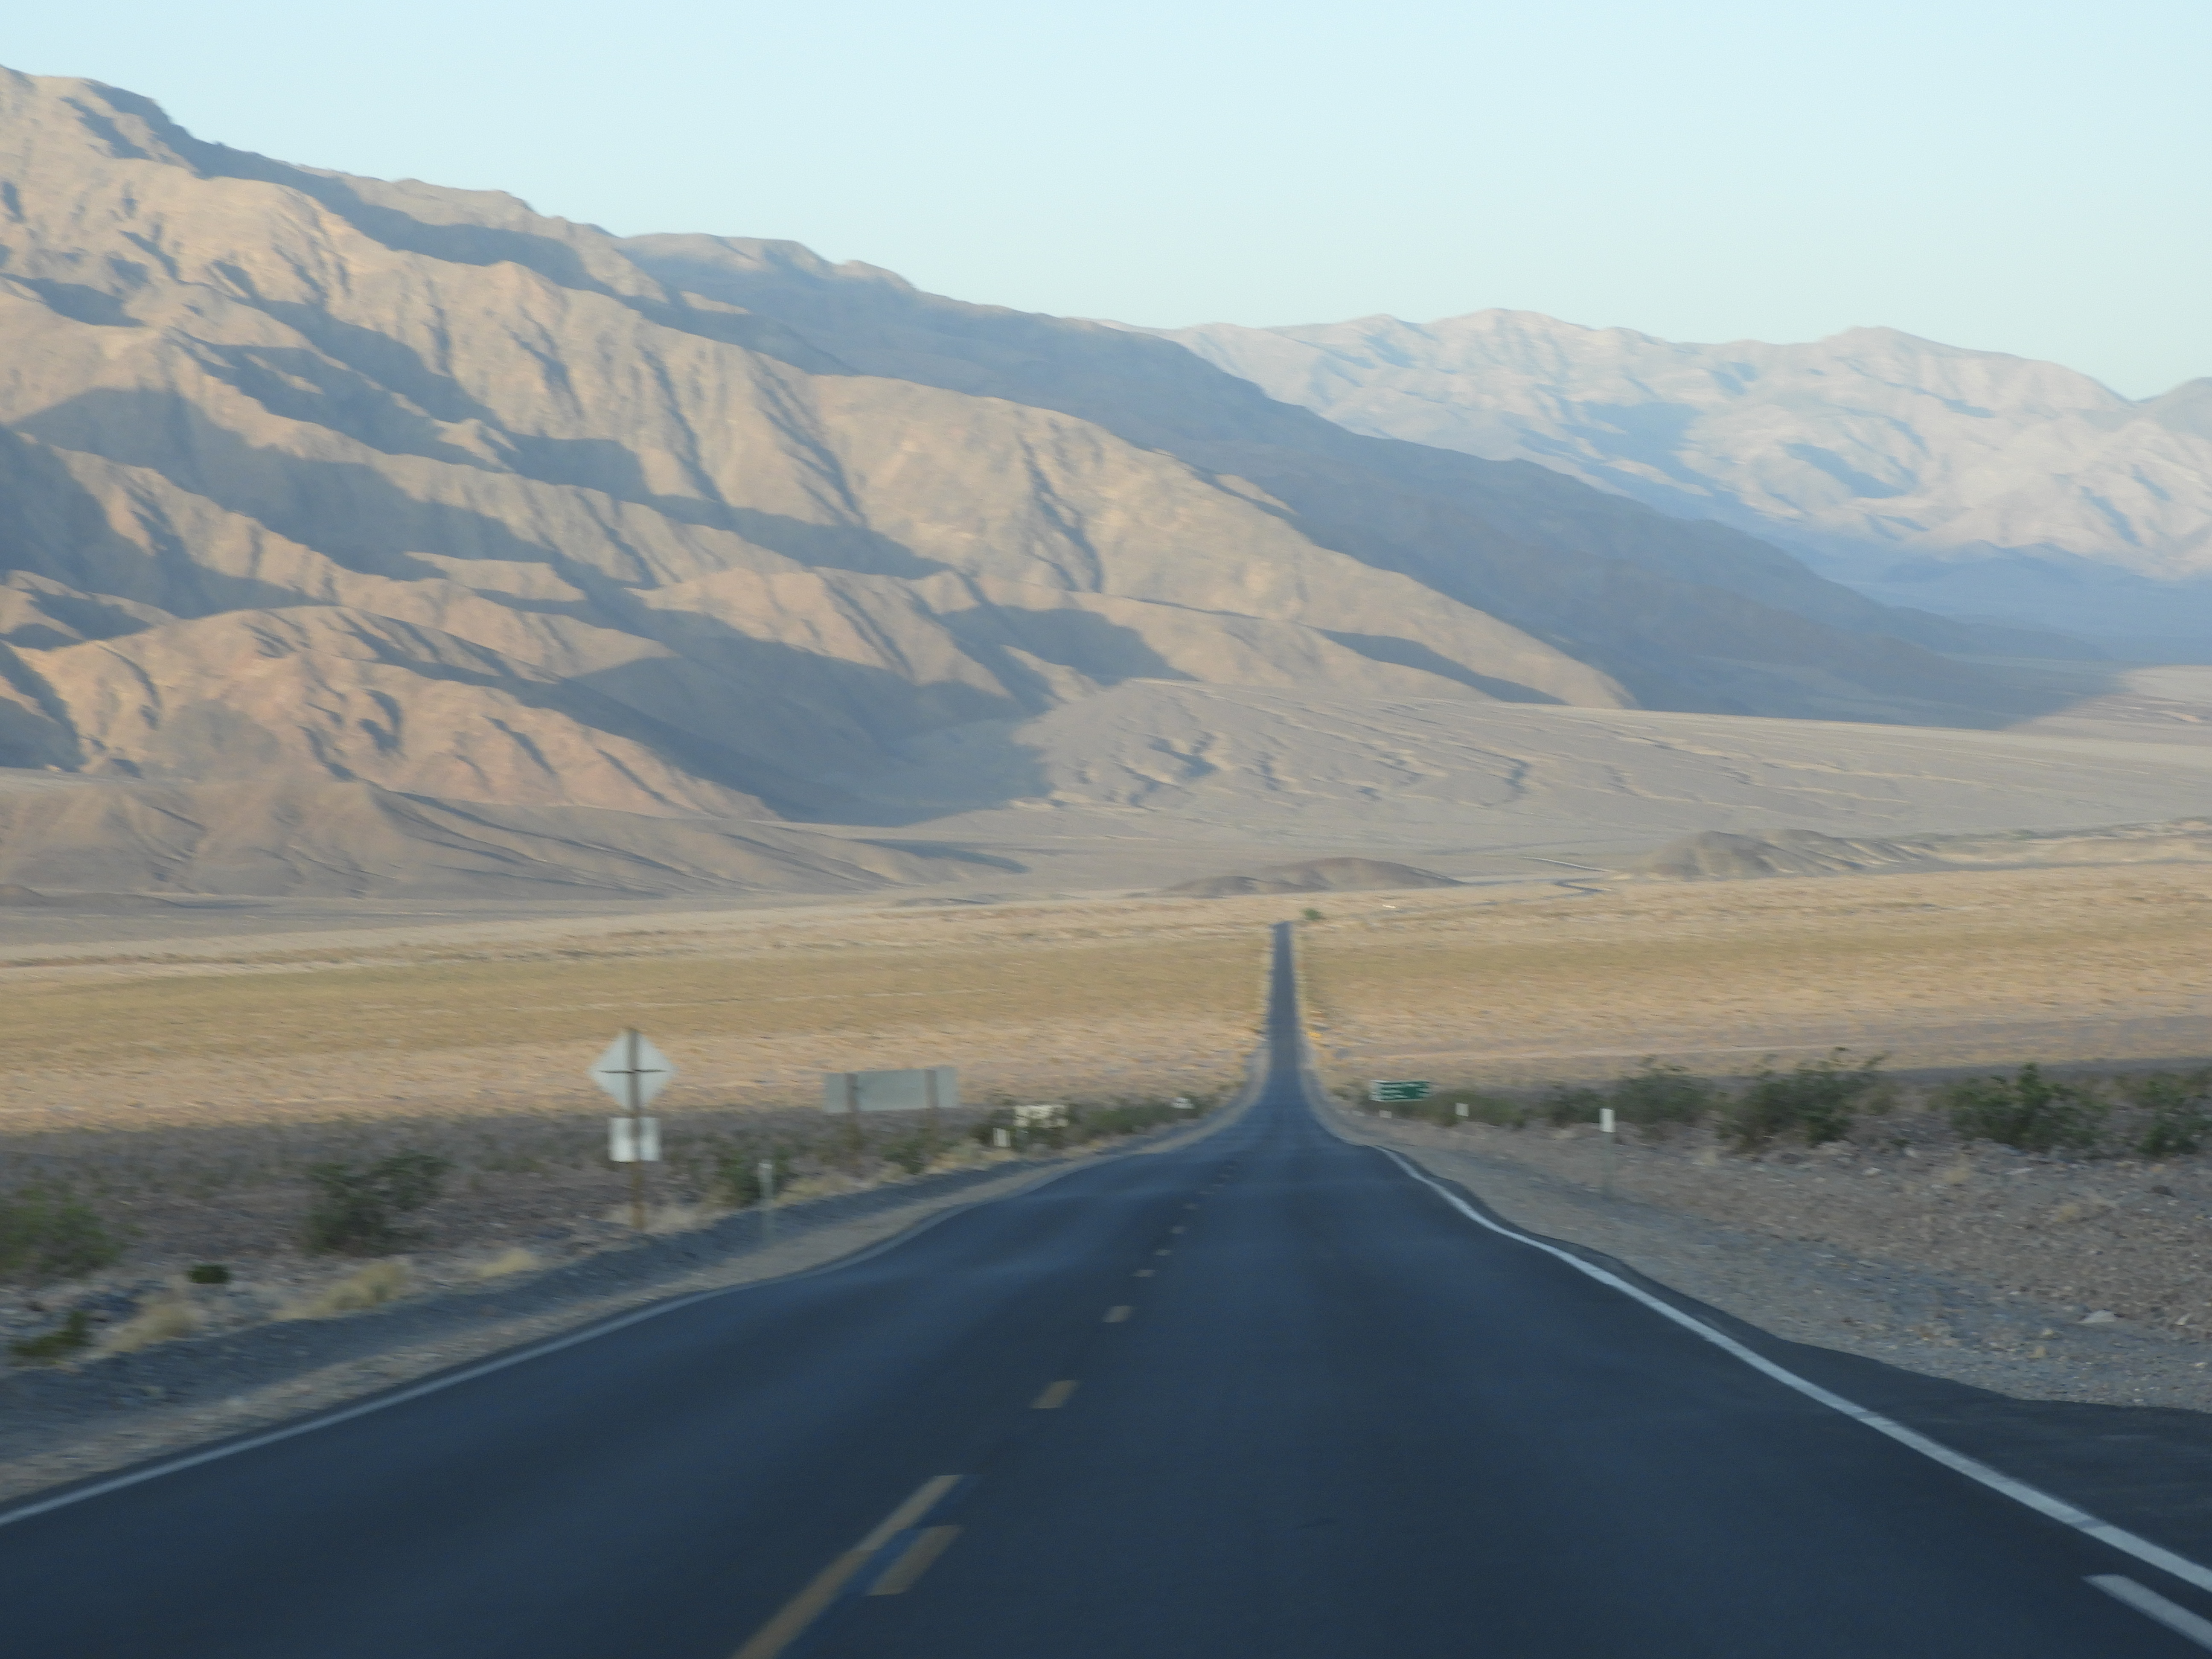 Along the highway from Furnace Creek to Stovepipe Wells in Death Valley National Park in southeastern California